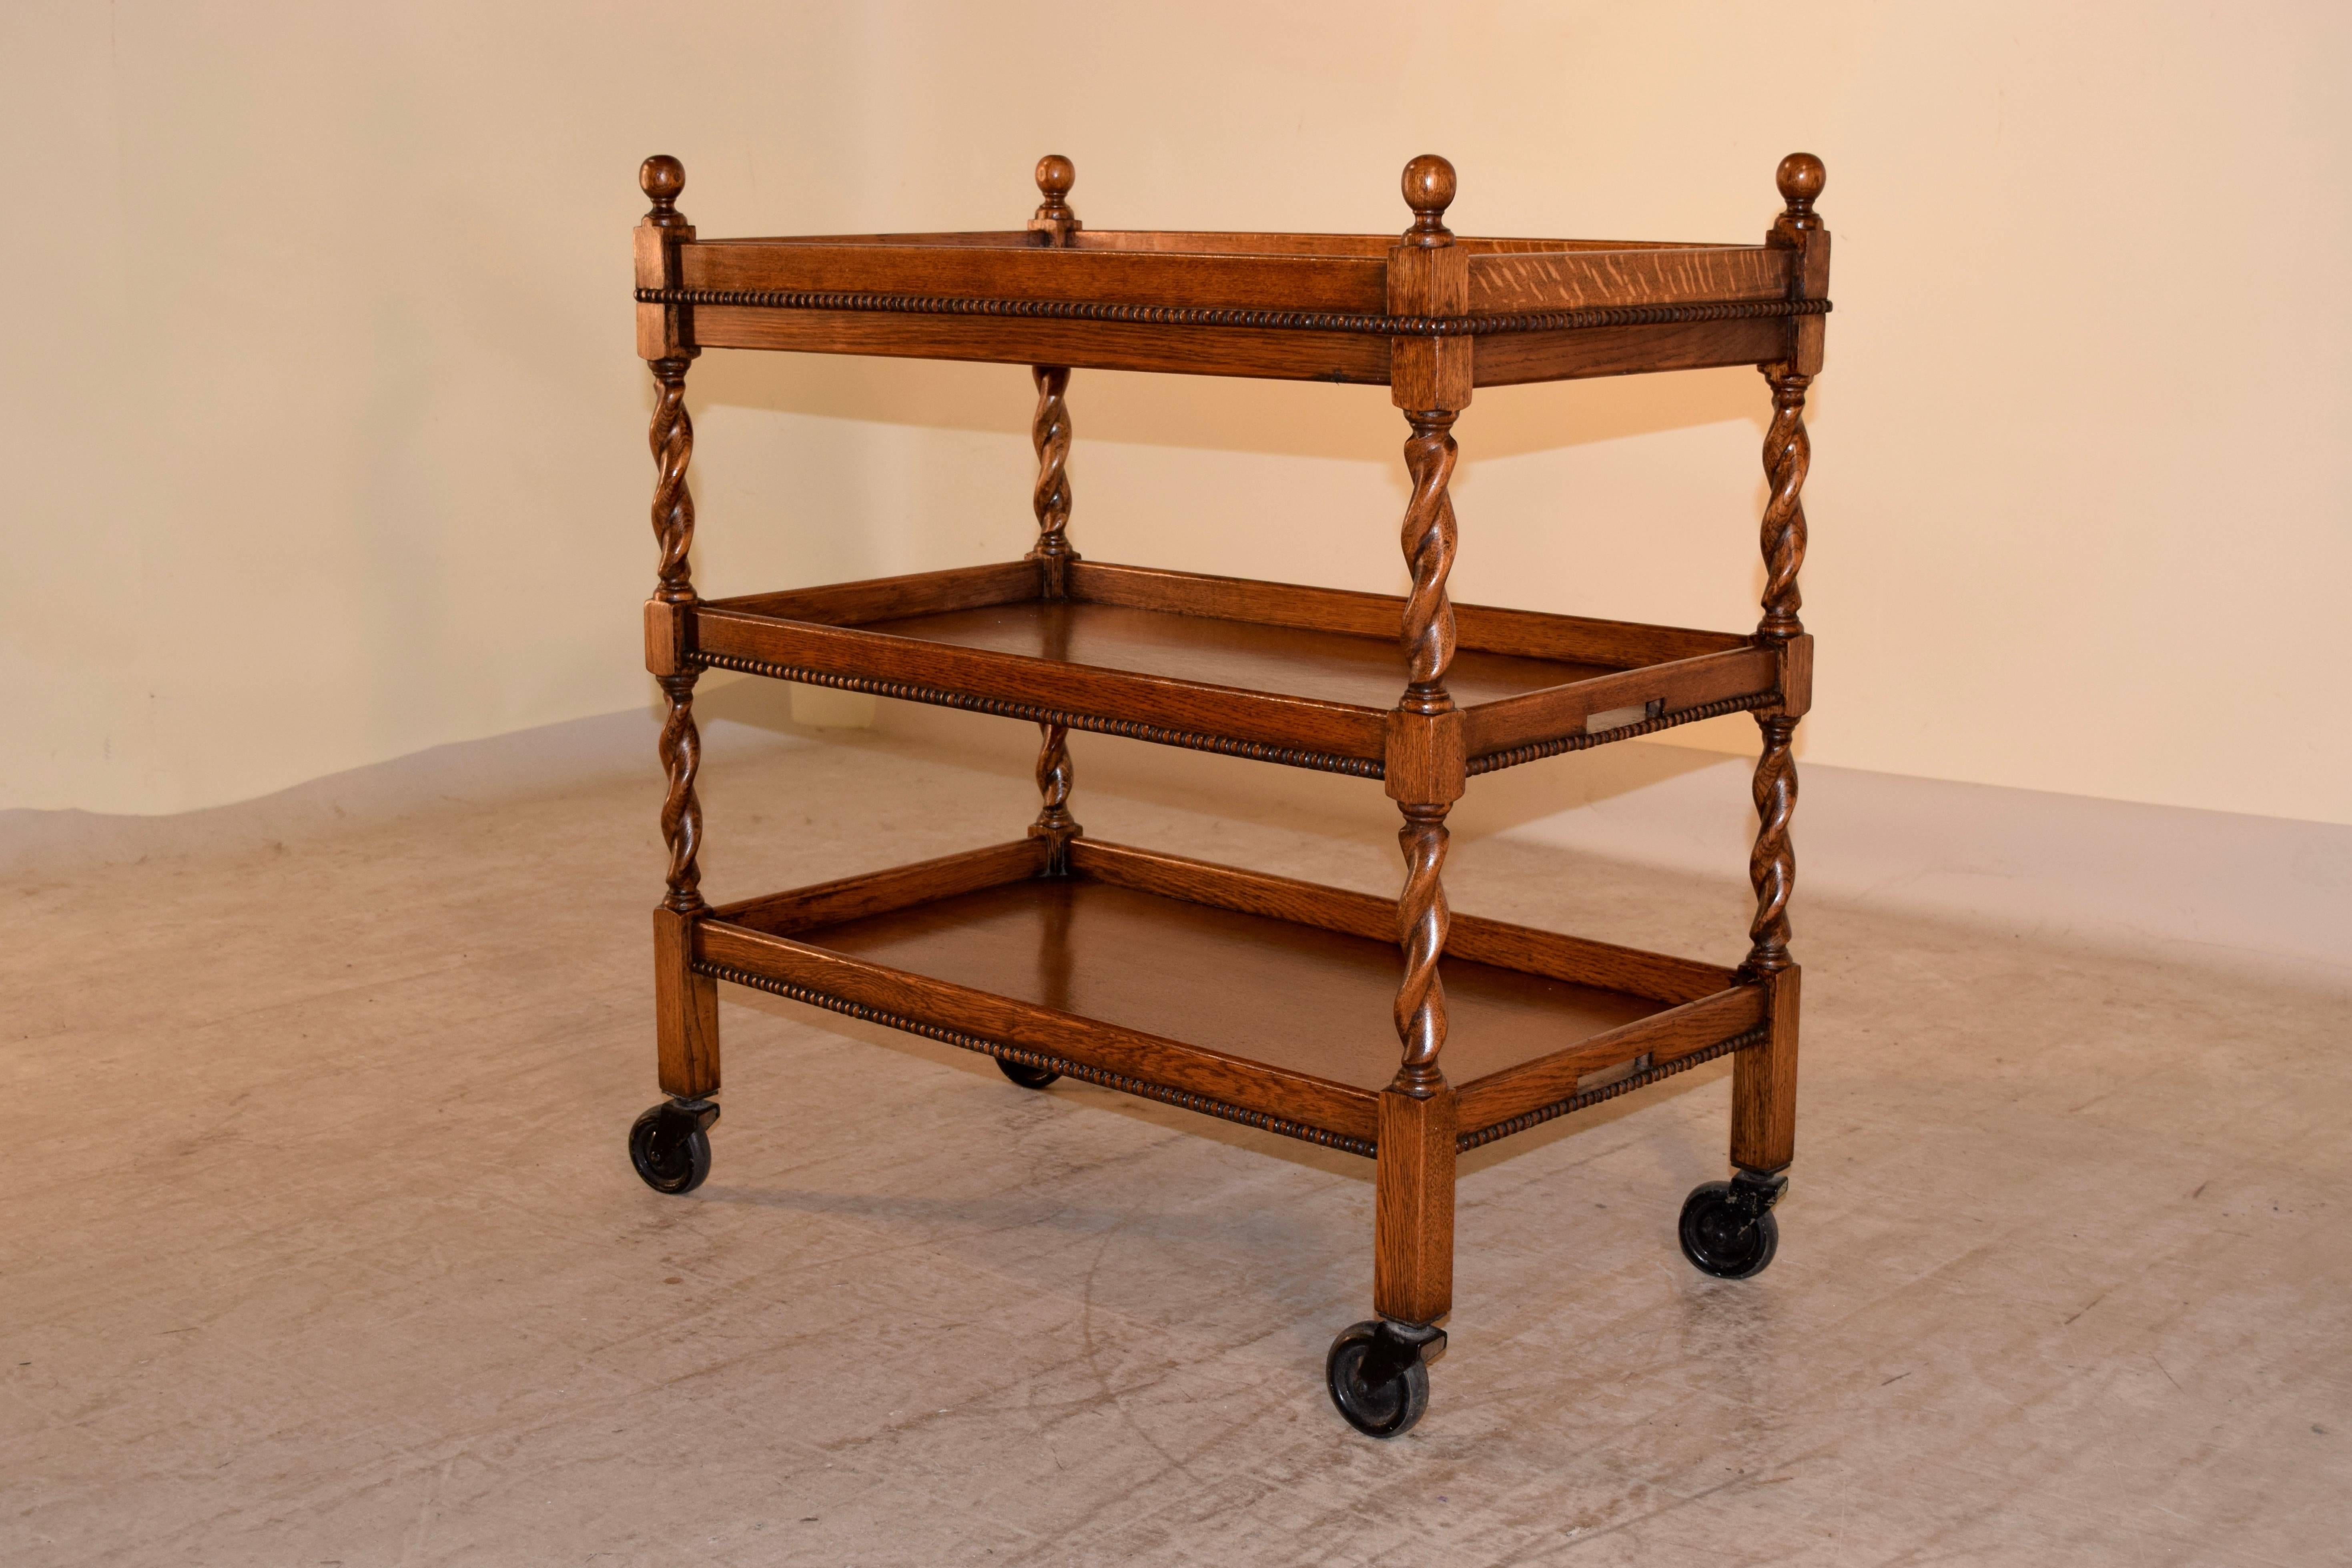 English oak drinks cart, circa 1900. The top is decorated with finials, following down to three shelves, all with galleries around the edges and beading. They are joined by hand turned legs and are supported upon original casters.